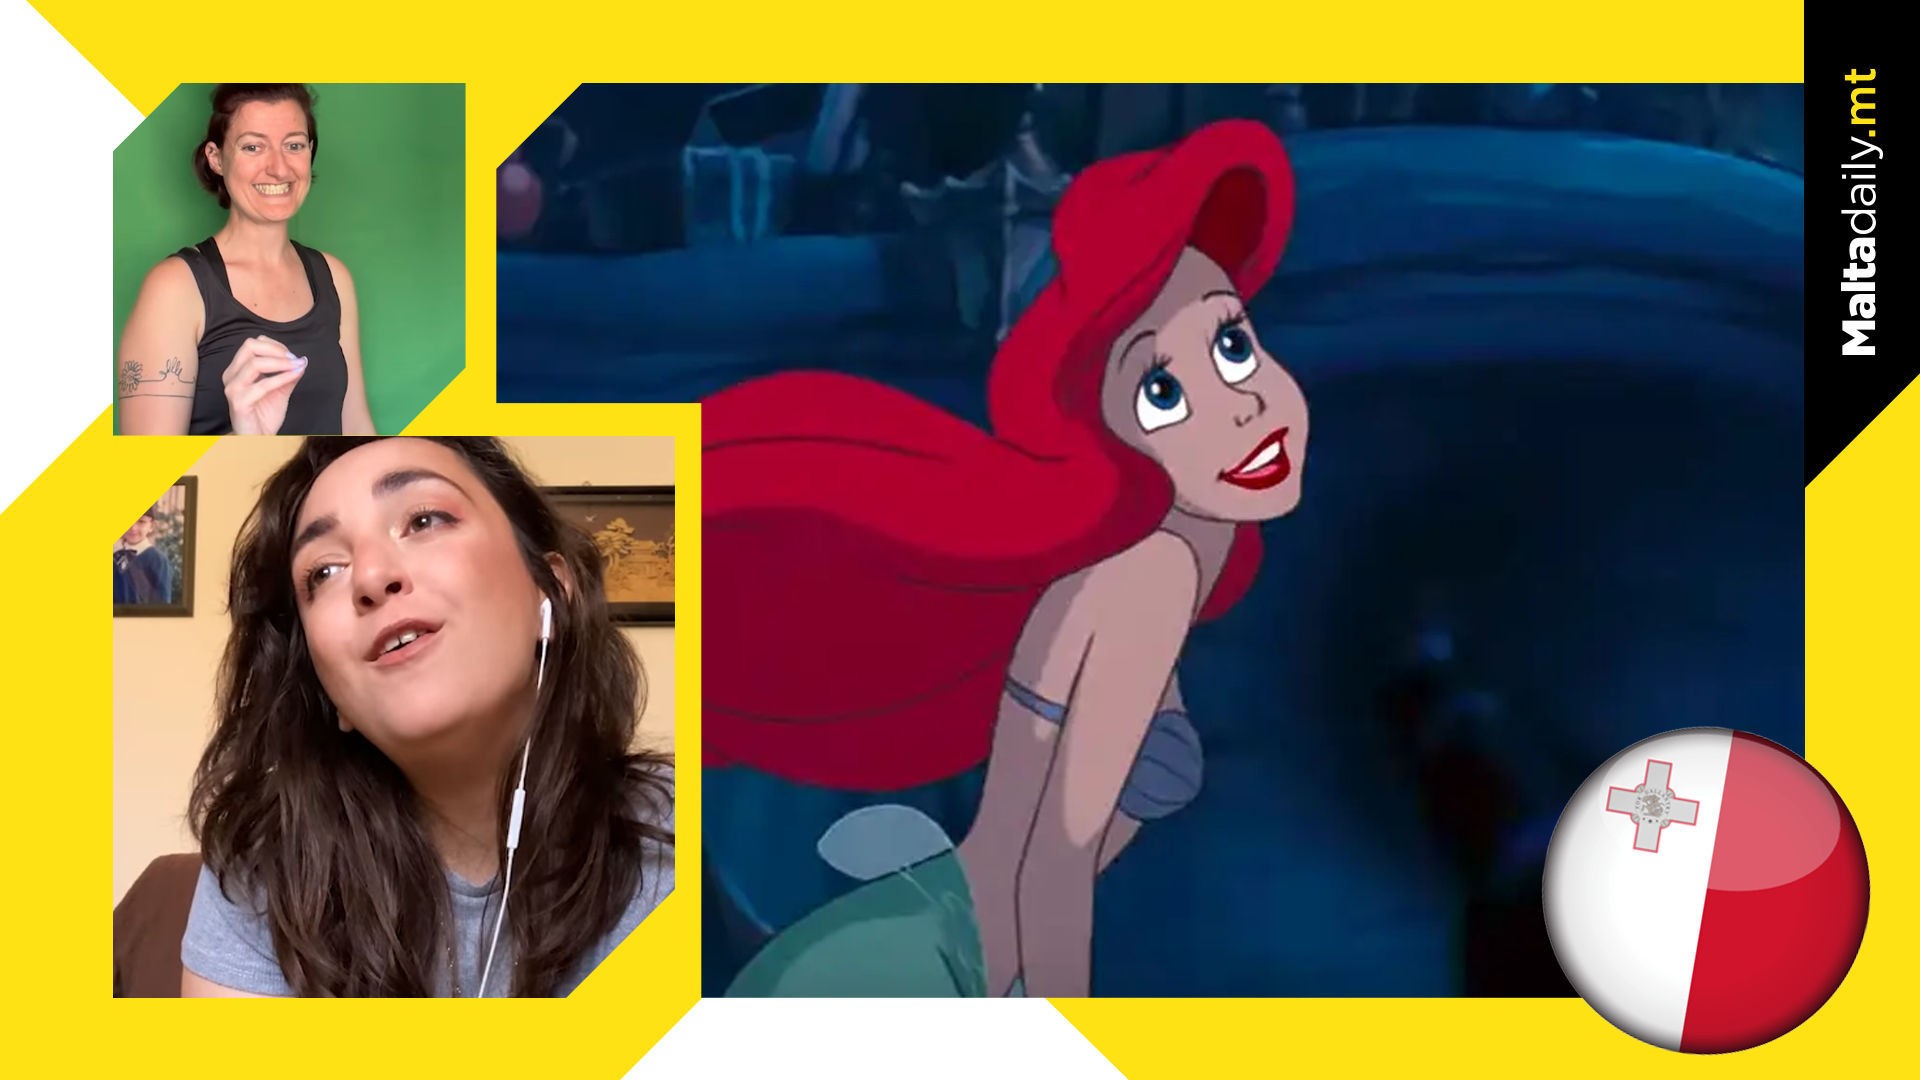 LITTLE MERMAID SONG IN MALTESE AND SIGN LANGUAGE